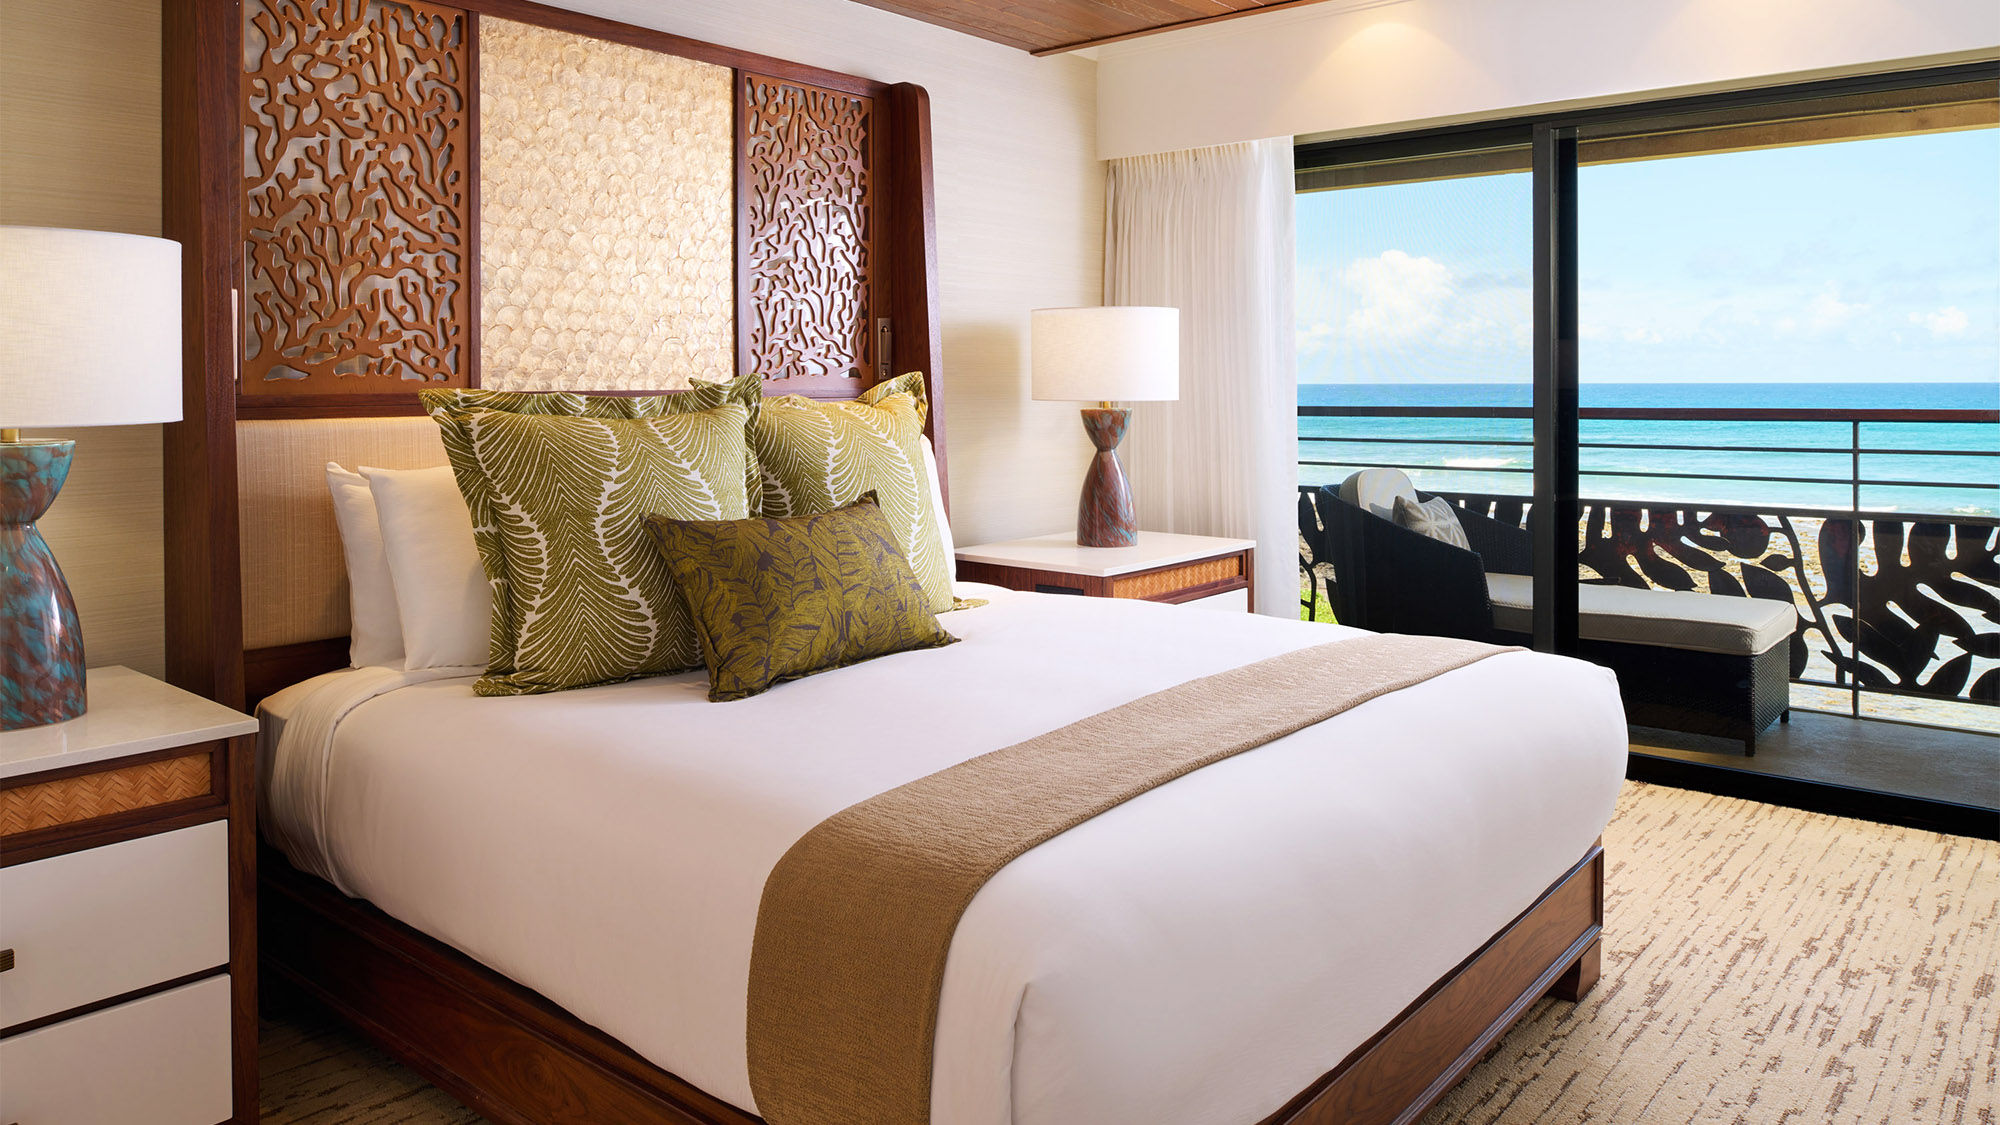 Ko'a Kea's newly renovated Oceanfront Suites are roomy and feature a private balcony and a living room.